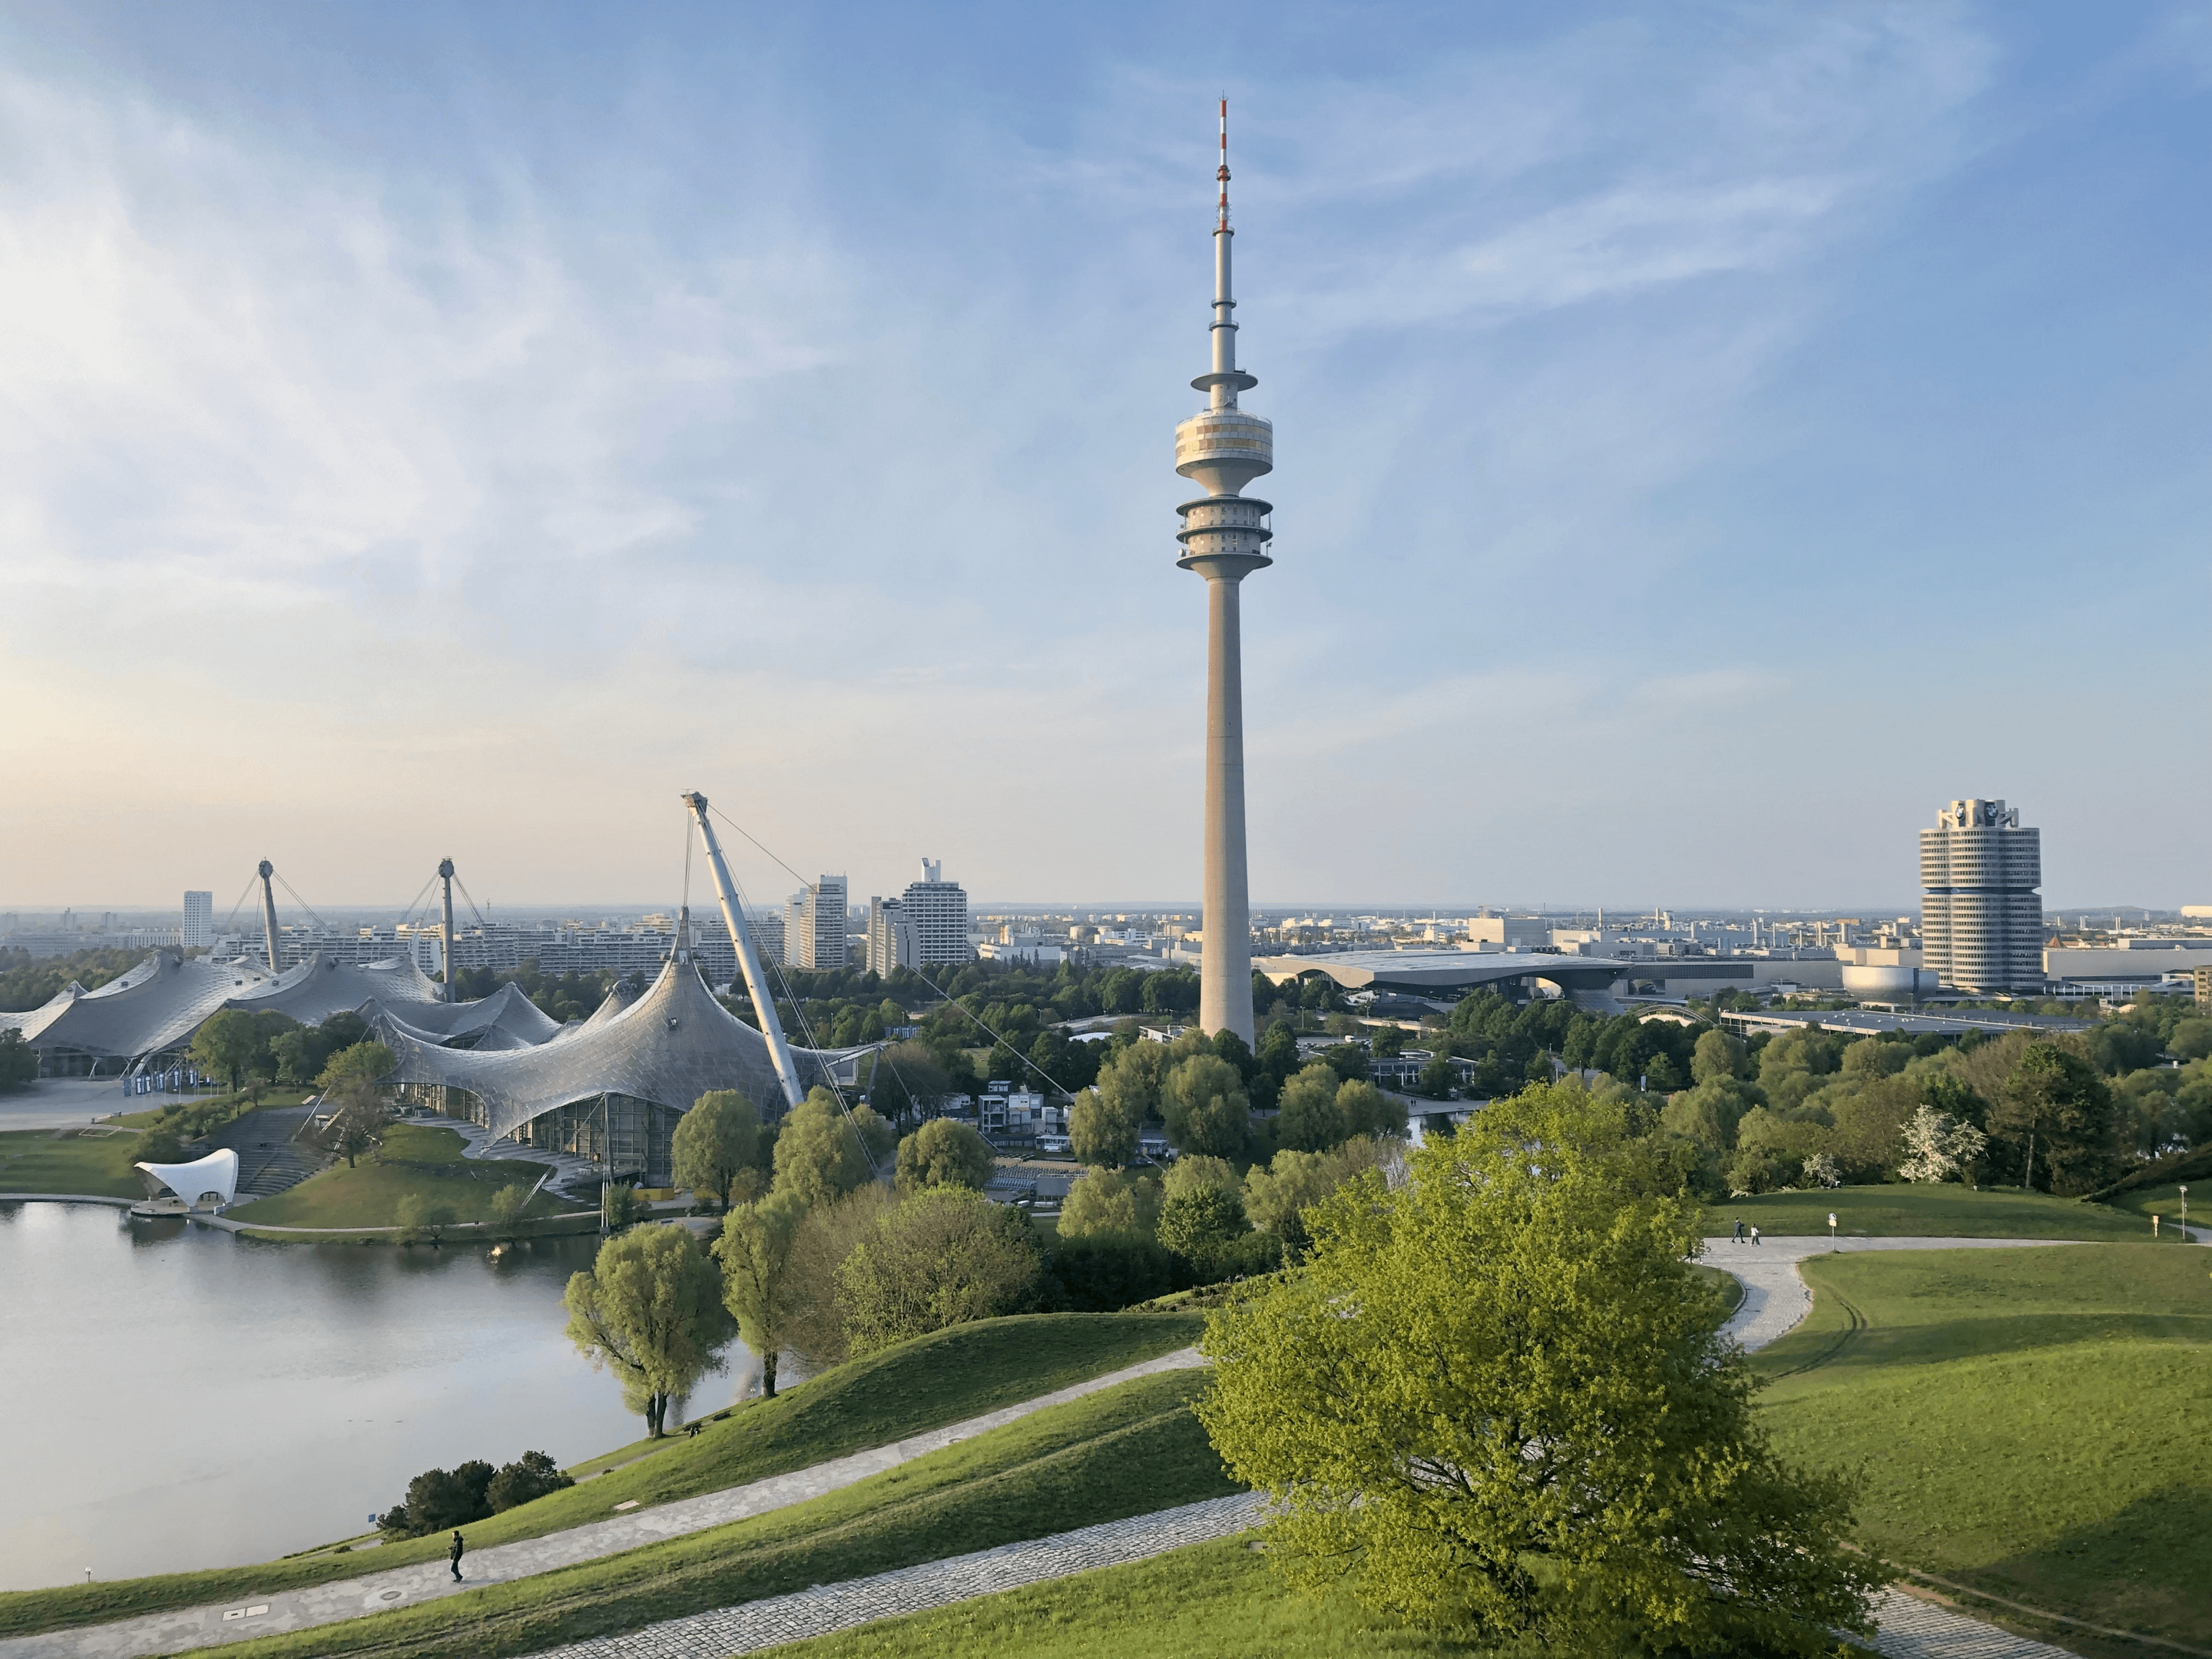 Discover the Olympic Park in Munich on a Walking Tour